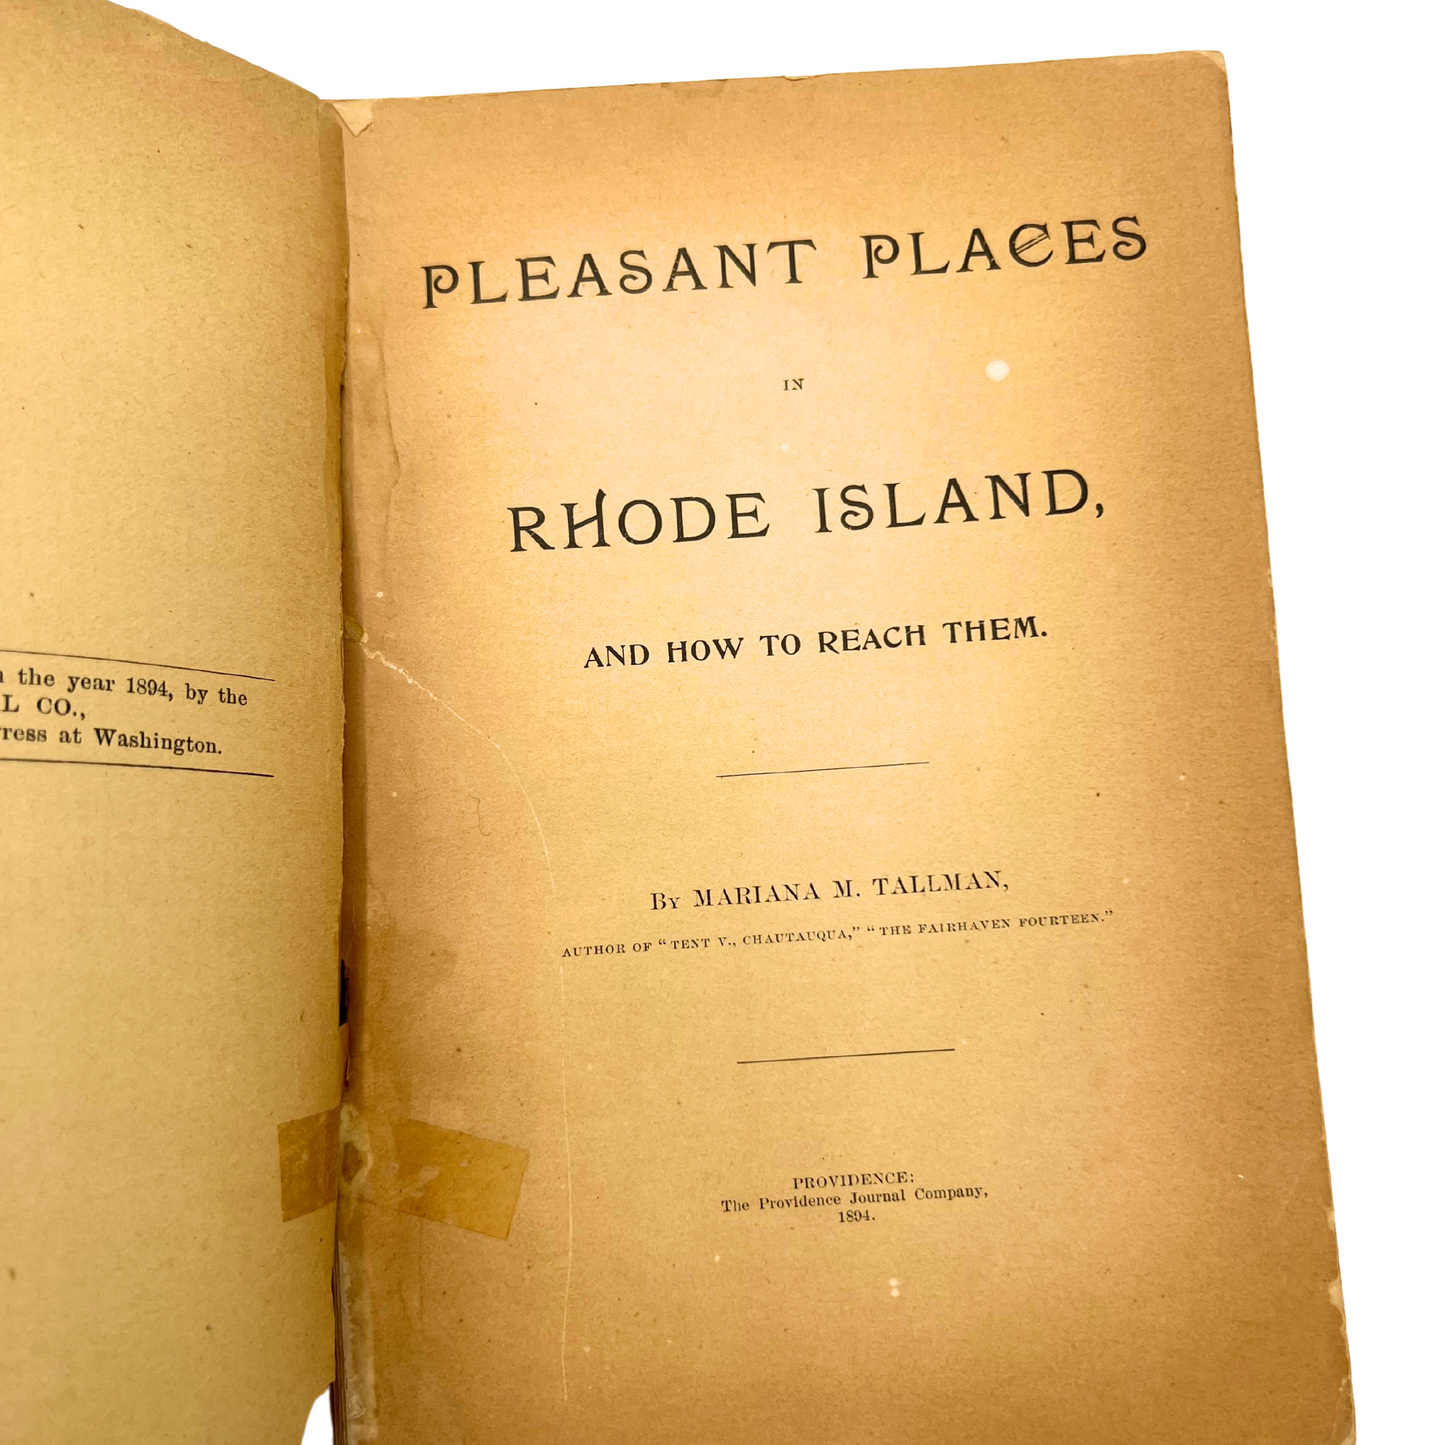 1894 book: Pleasant Places in Rhode Island, and How to Reach Them